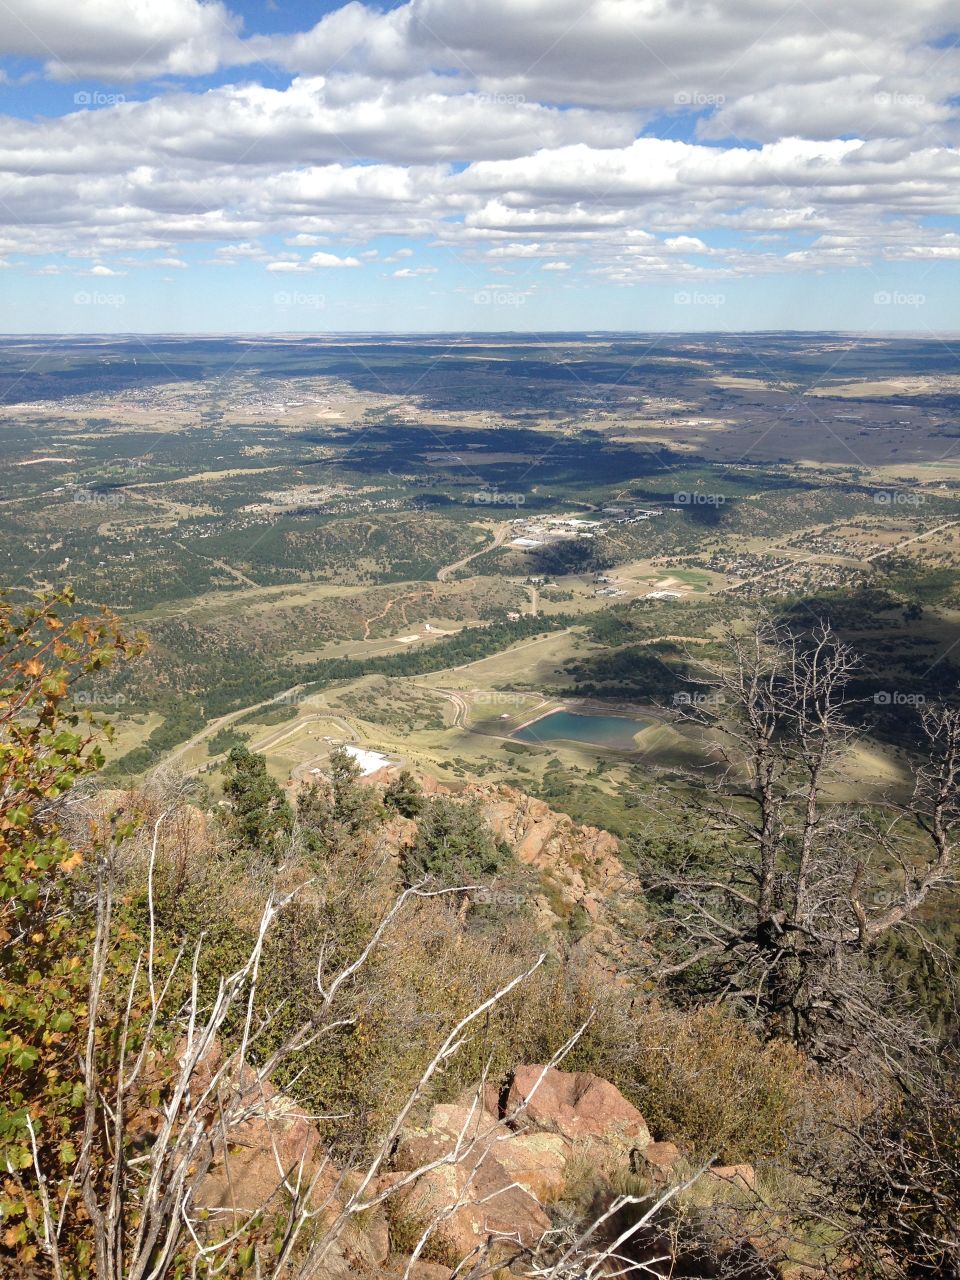 View from the top of Blodget peak